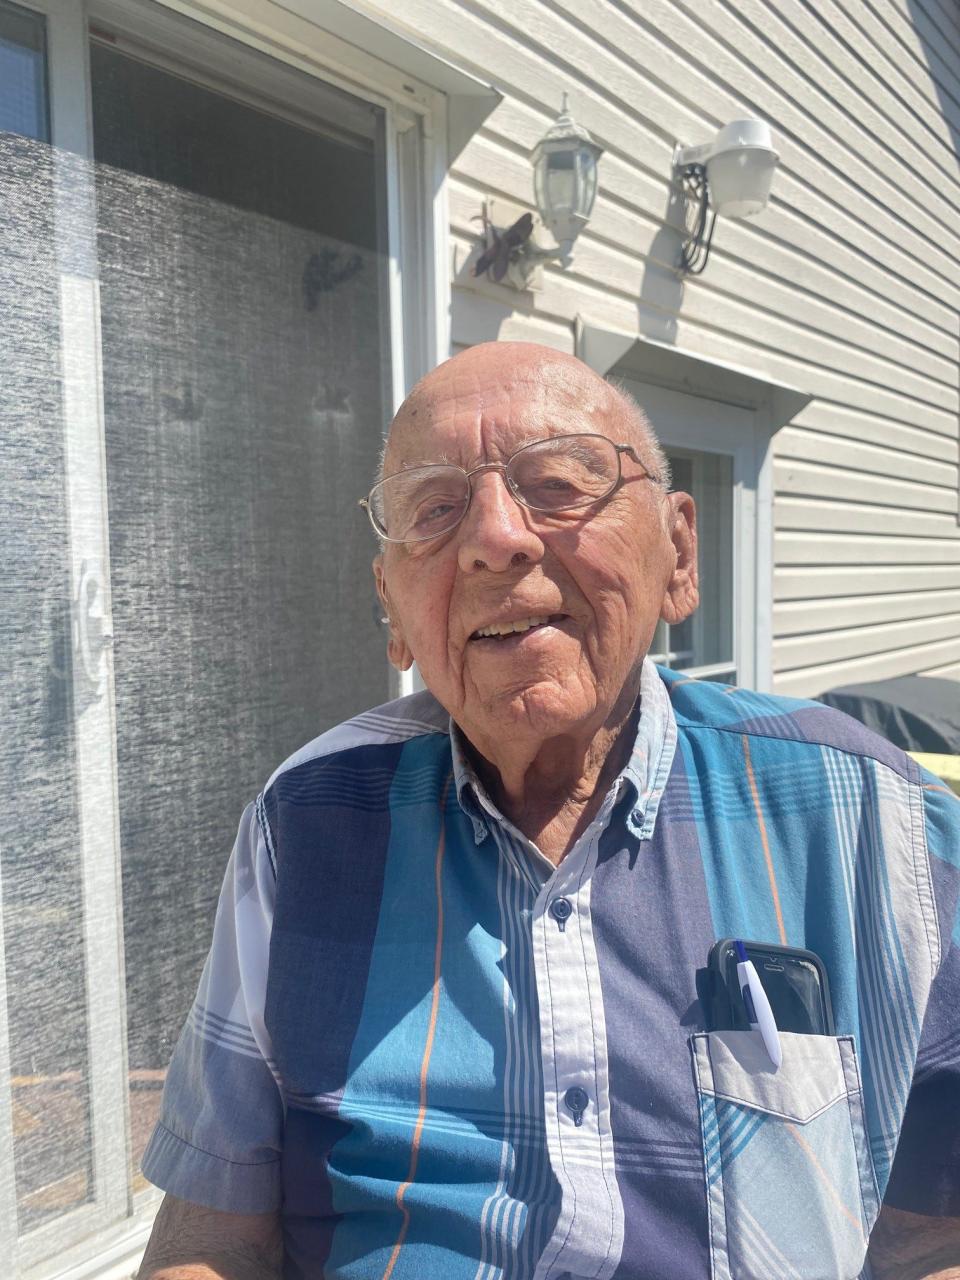 Al Wadley, 95, of Mansfield, loves life and credits his good health to working hard, hobbies and having fun.